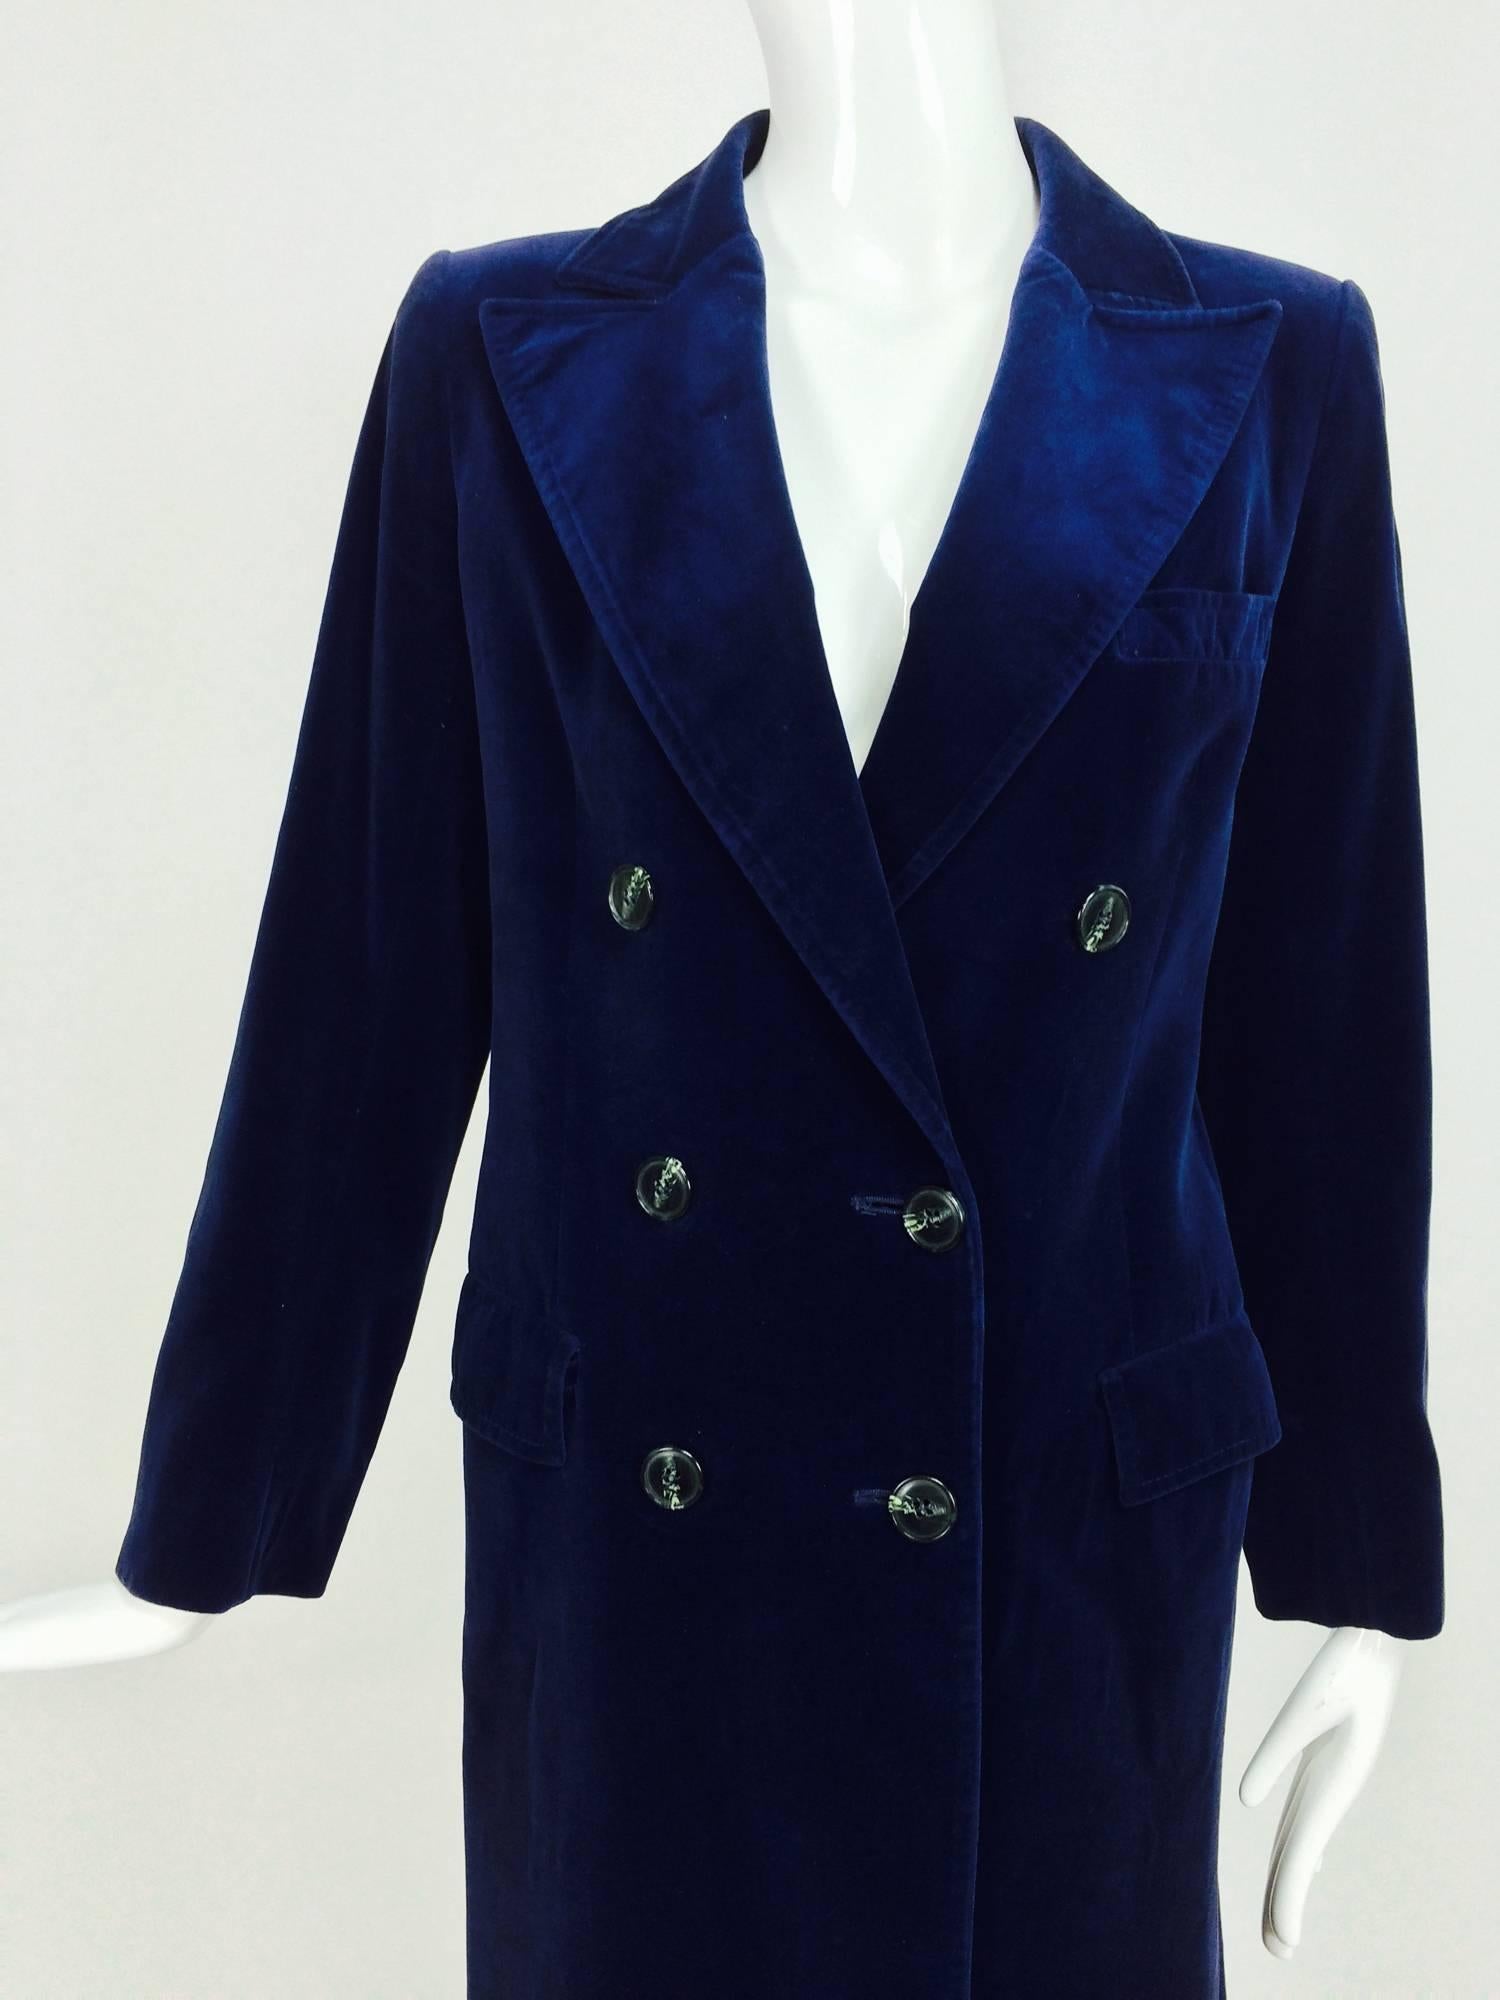 Vintage Guy Laroche ink blue, soft cotton velvet double breasted coat & trousers from the 1970s...This set captures the glamourous 1970s menswear style worn by celebrities like Bianca Jagger & St Laurent muse Betty Catroux...The coat is double